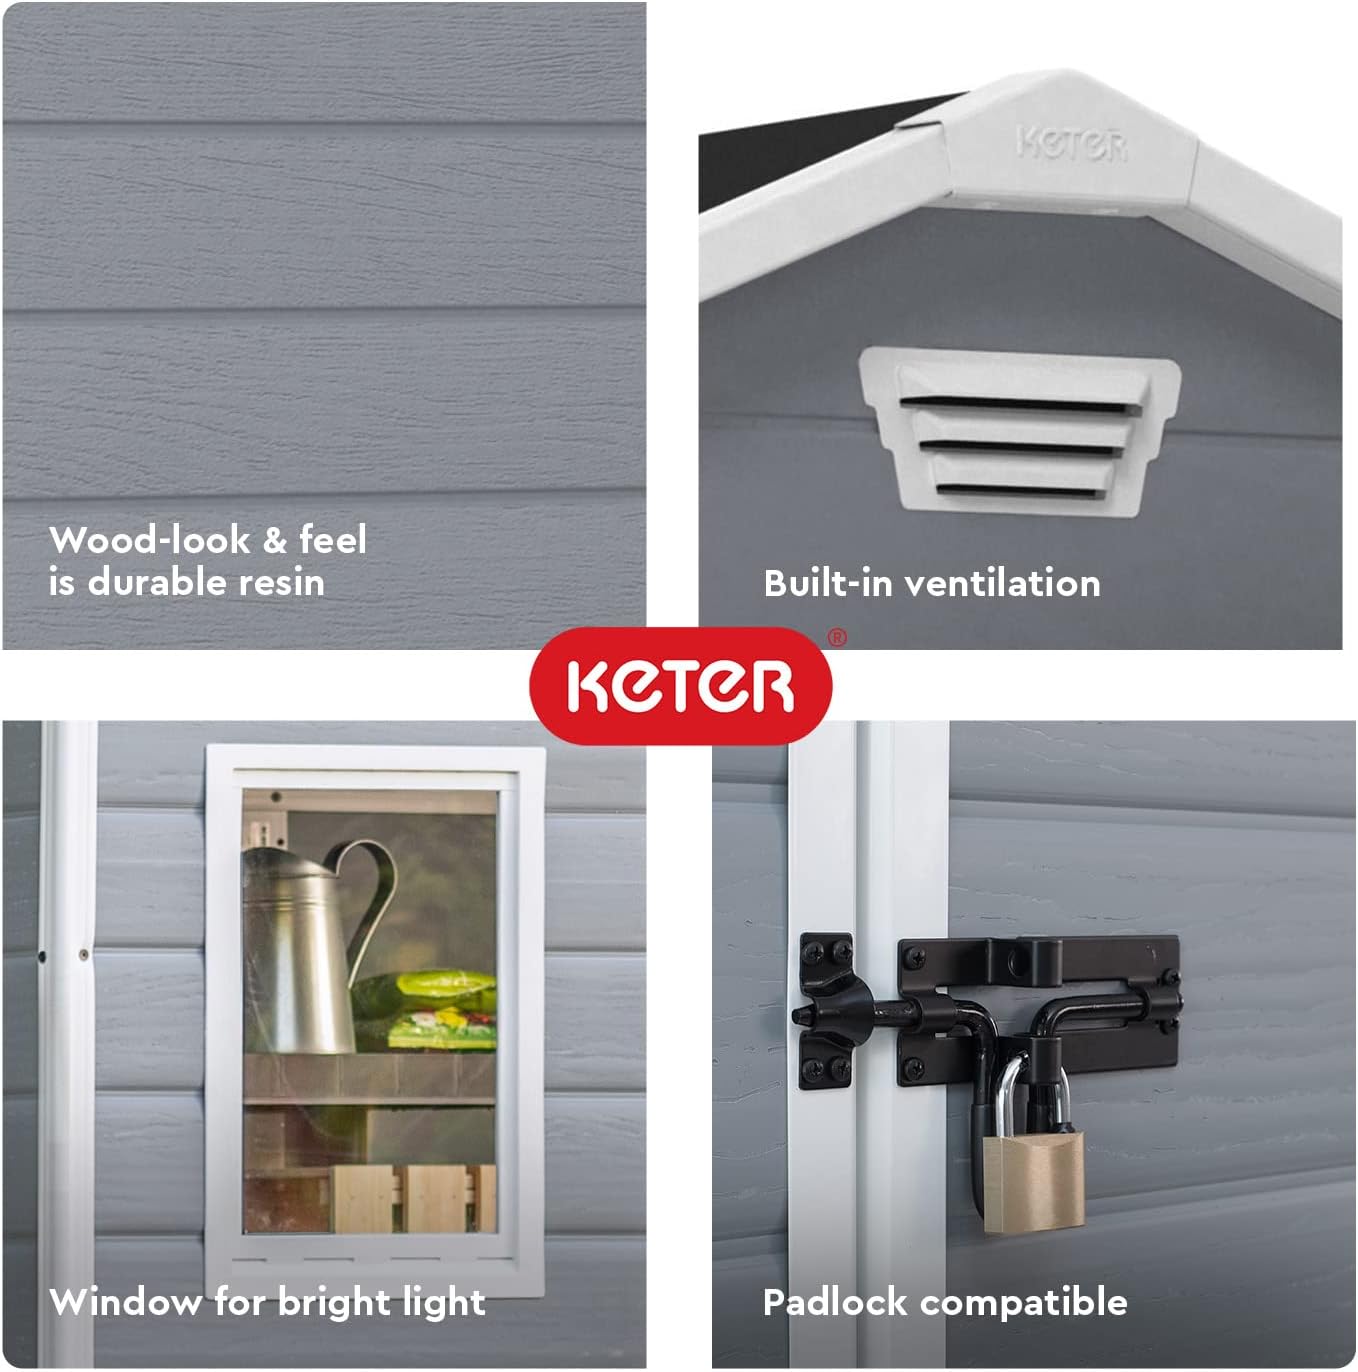 Keter 4x6 Storage Shed features